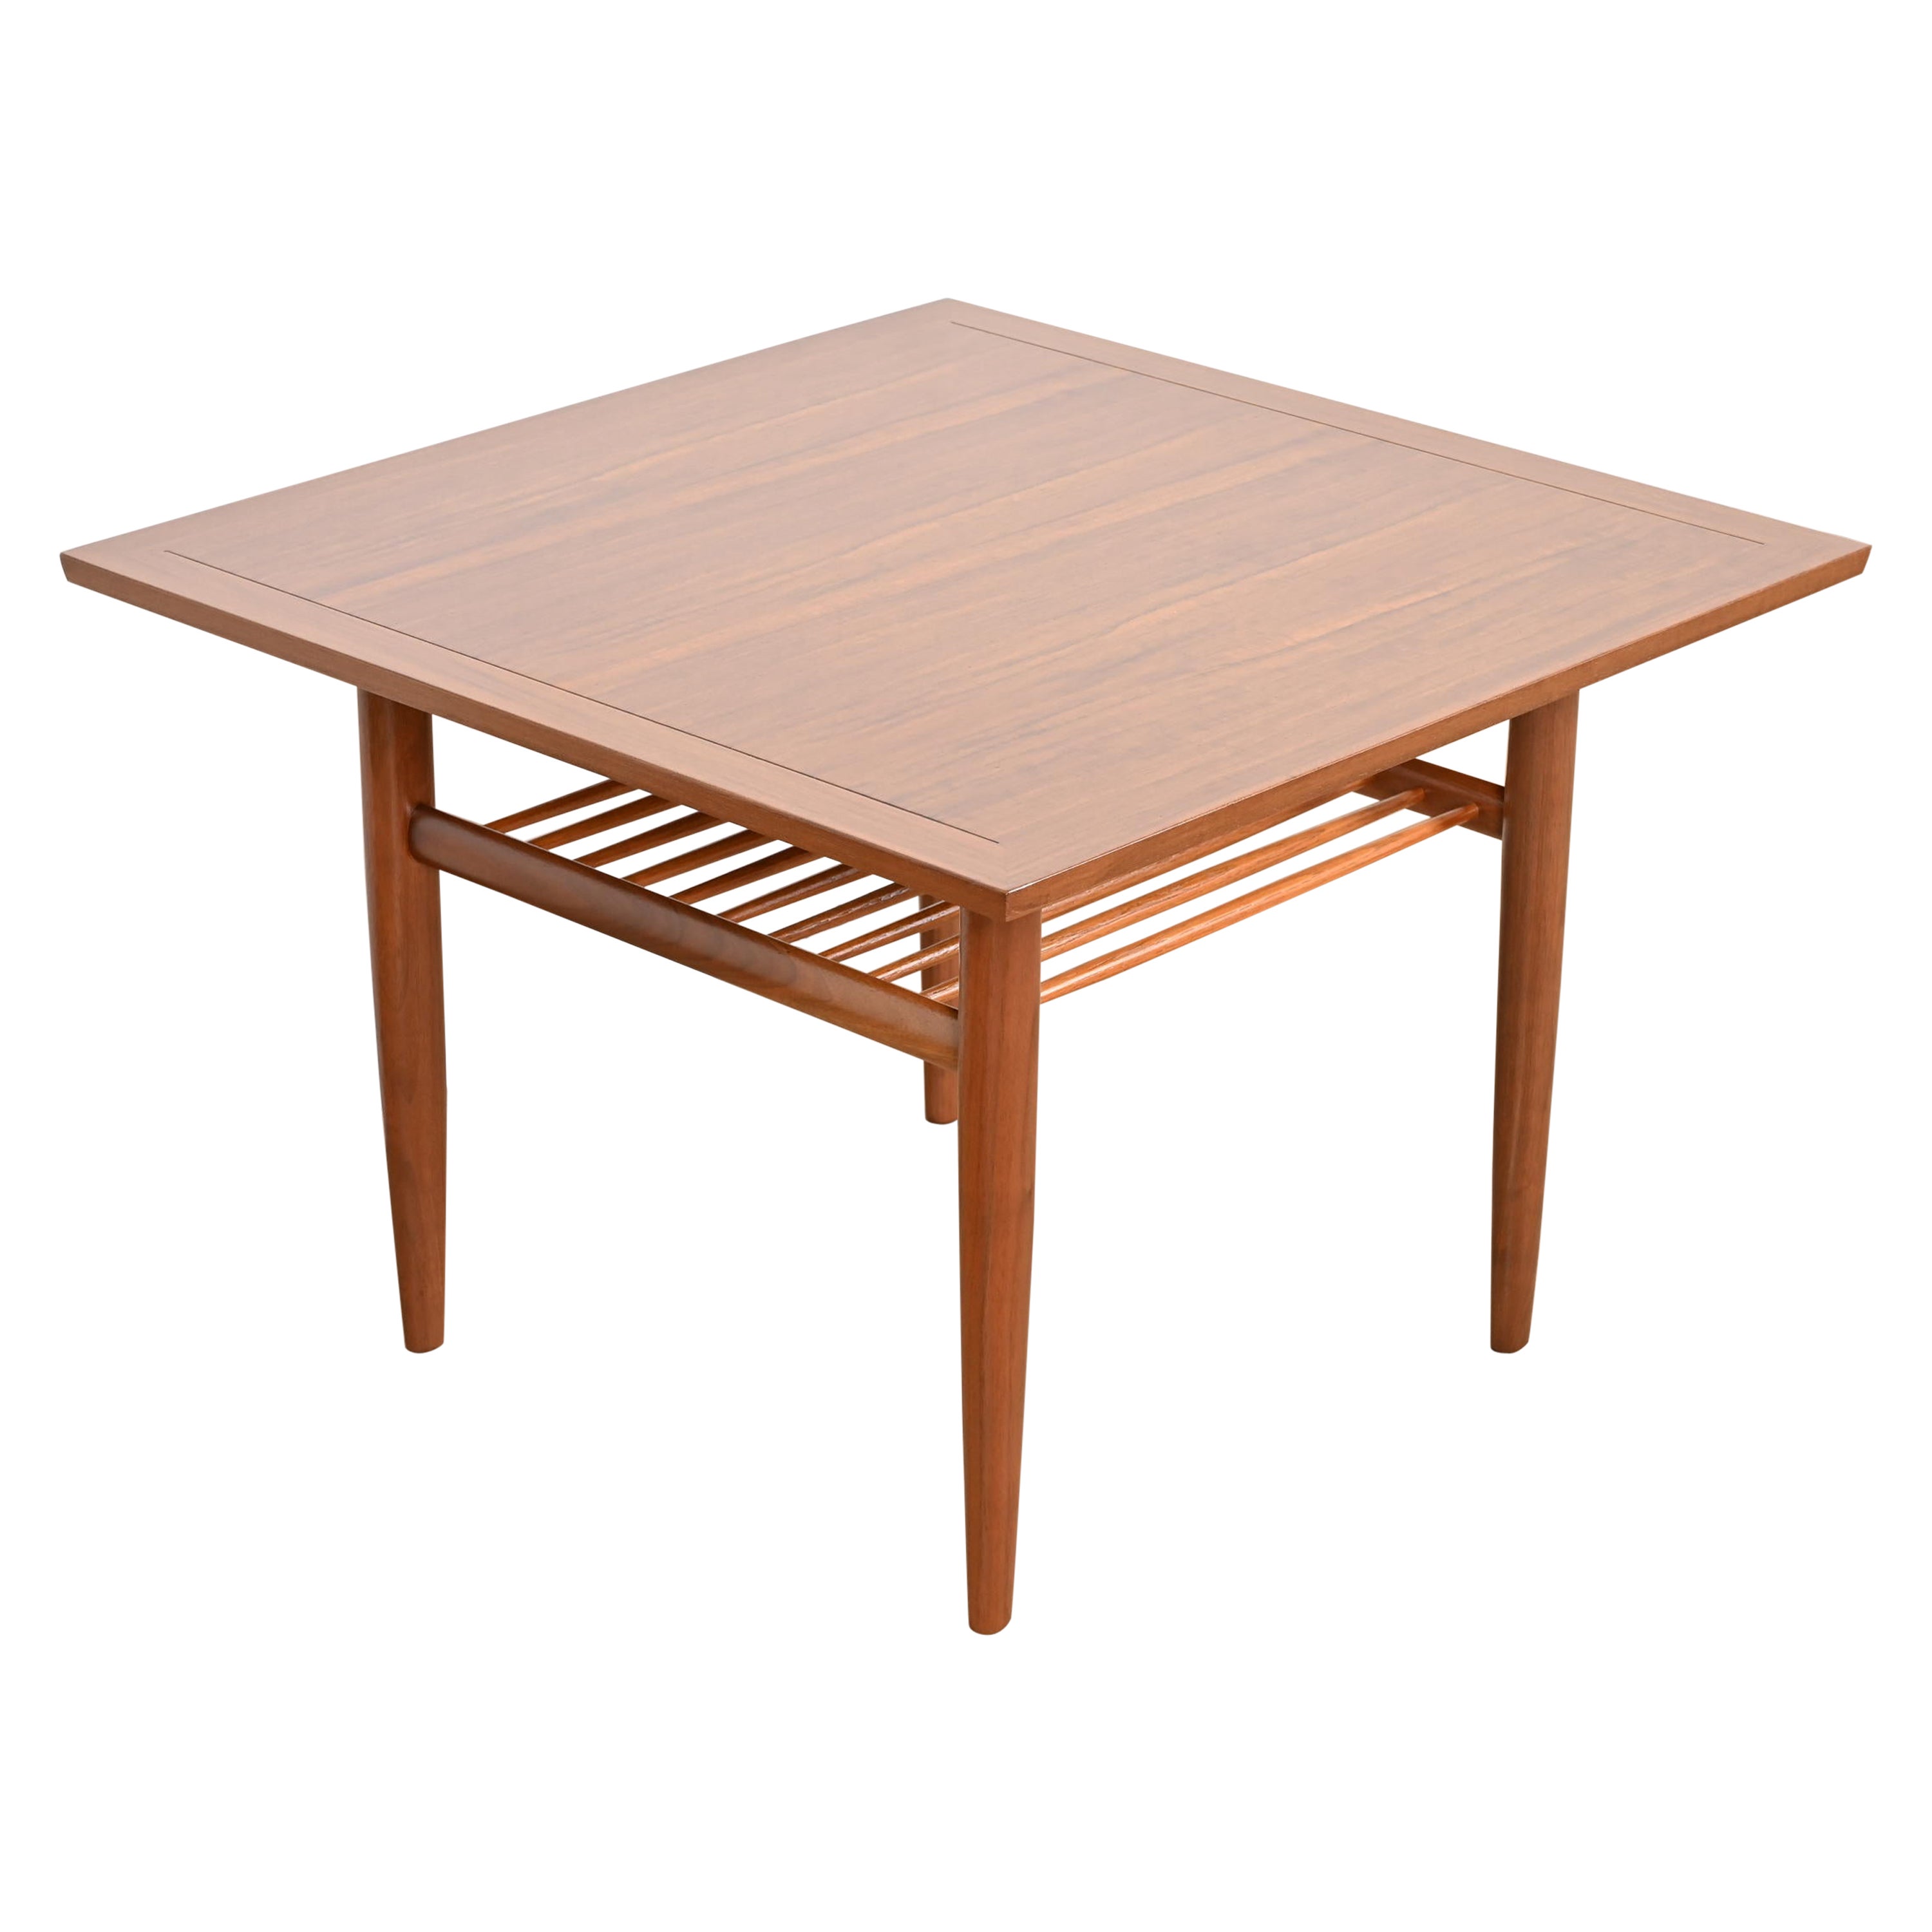 What is George Nakashima known for?